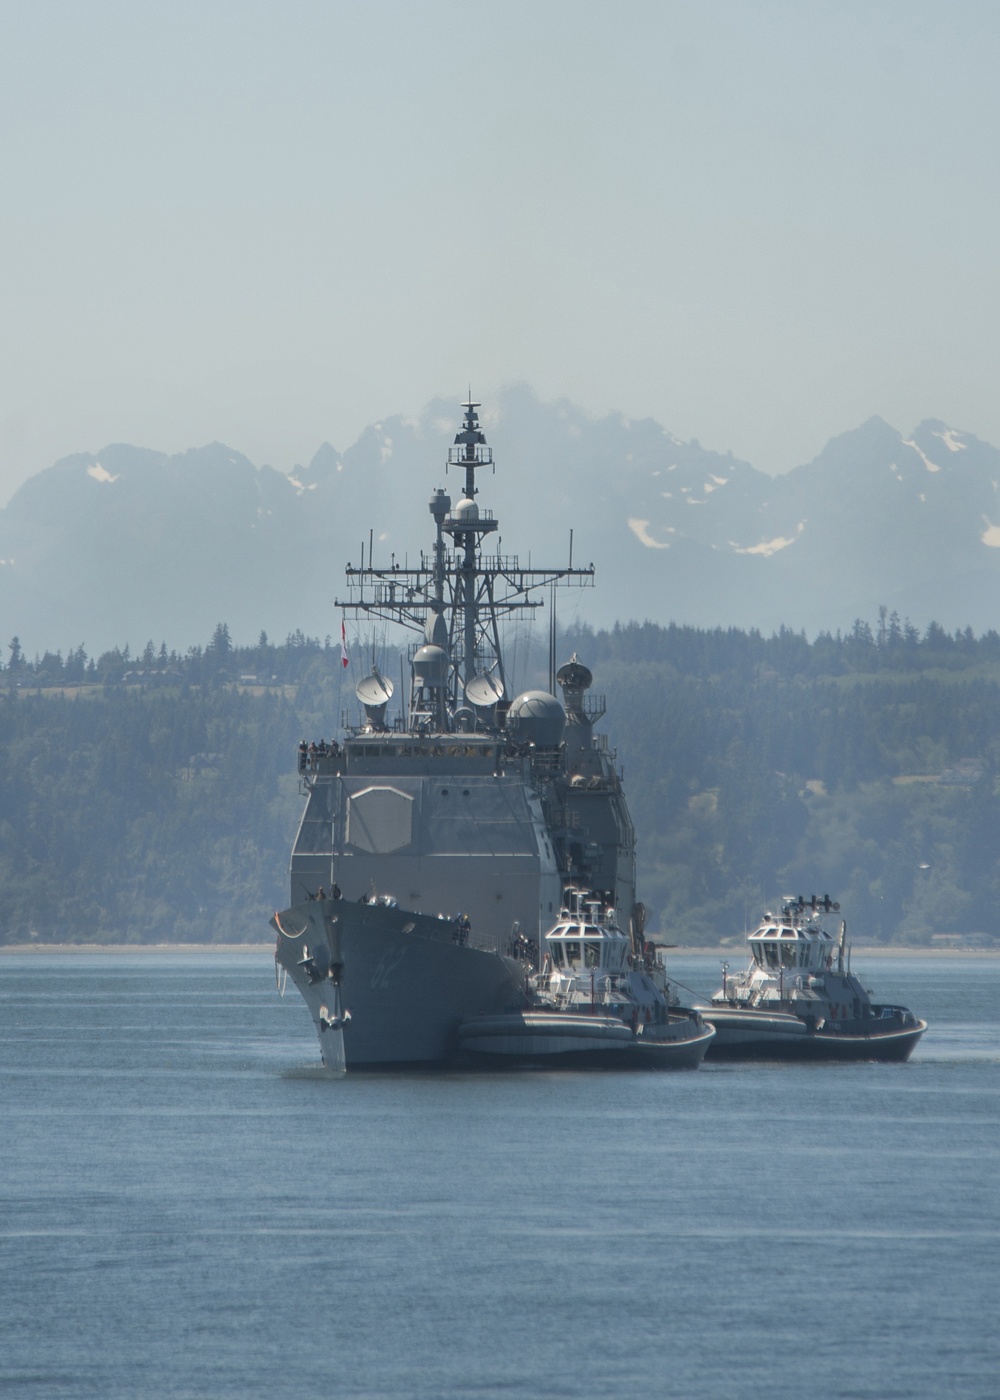 The Ticonderoga-class guided-missile destroyer USS Chancellorsville (CG 62) prepares to arrive at Naval Station Everett